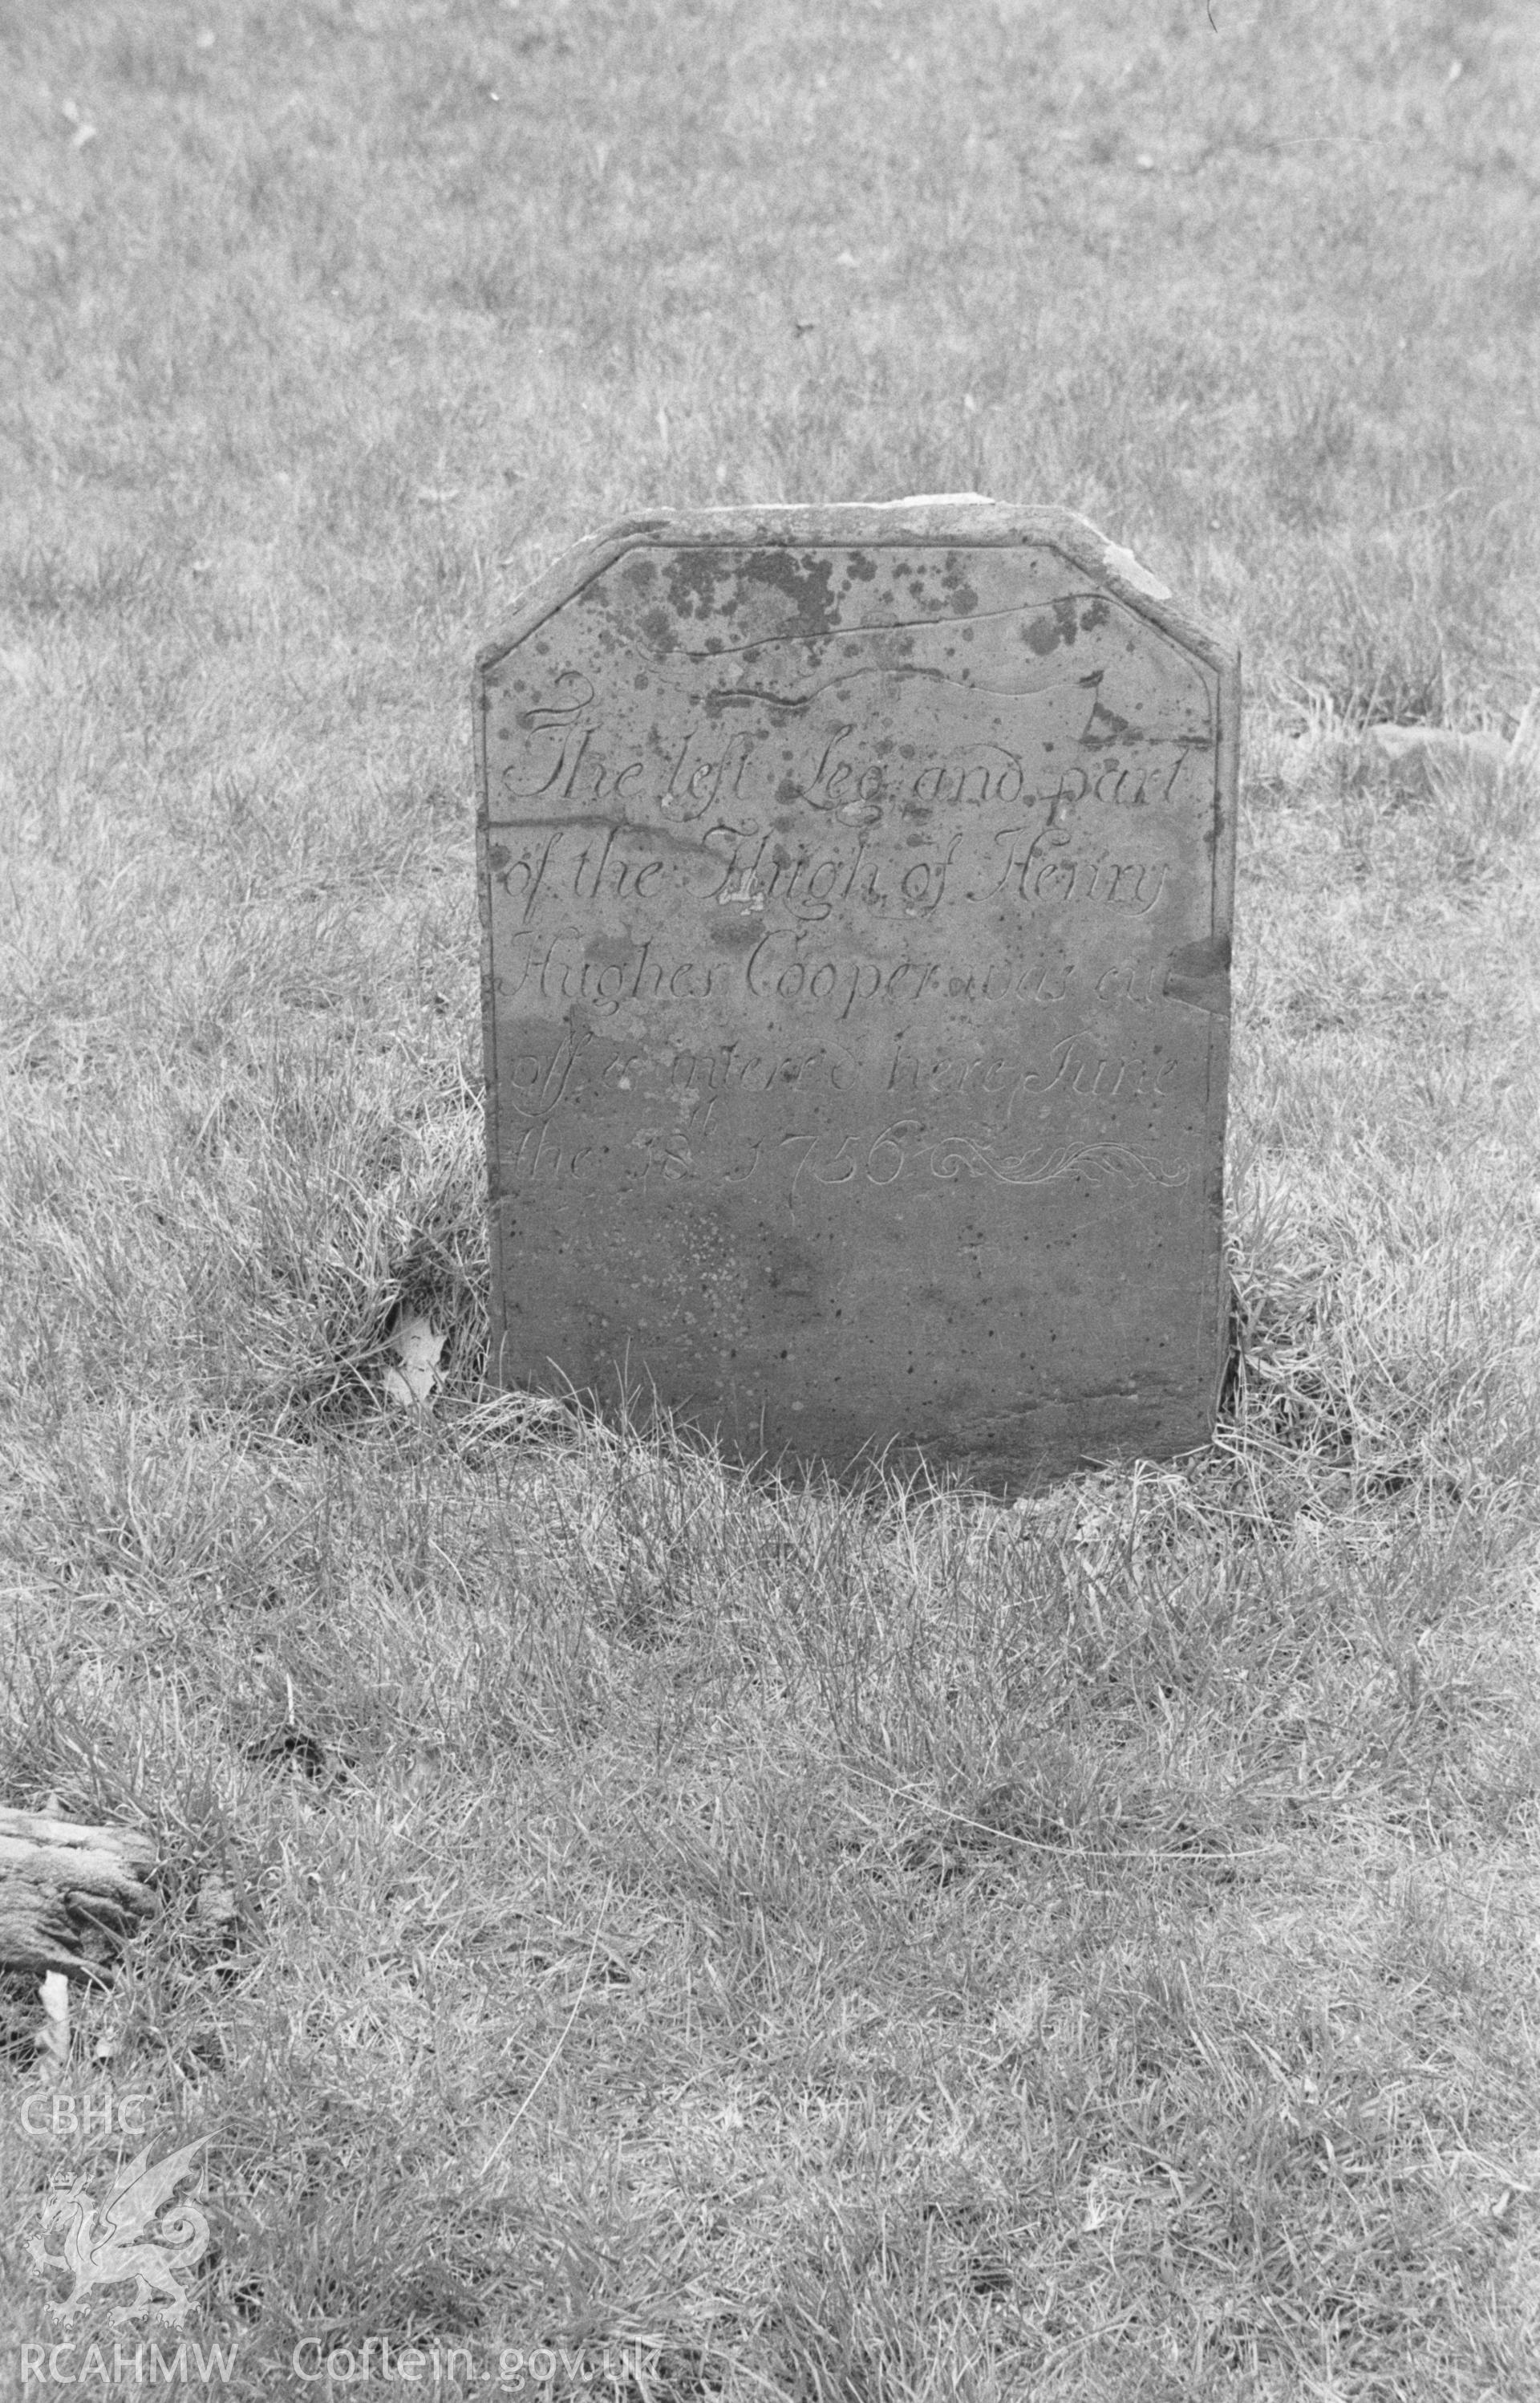 Digital copy of black & white negative showing gravestone for 'the left leg and part of the thigh of Henry Hughes, 1756' in St Mary's churchyard, Strata Florida Abbey. Photographed in April 1964 by Arthur O. Chater. SN 7465 6577, looking west.